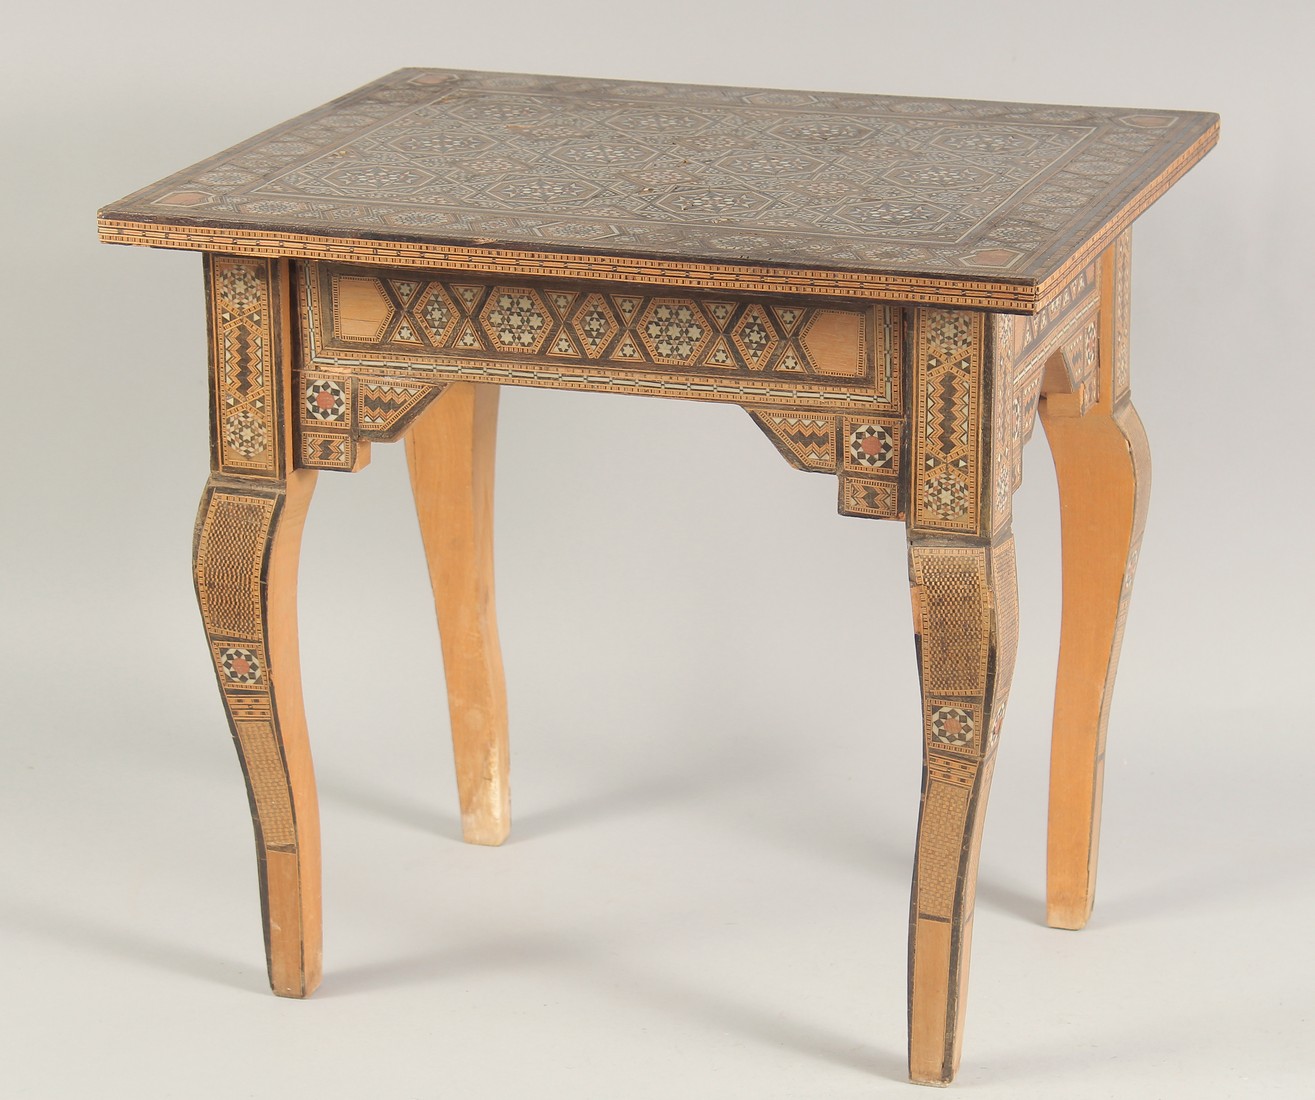 A VERY FINE SYRIAN DAMASCUS BONE INLAID WOODEN TABLE, circa 1900-1920, finely onlaid with